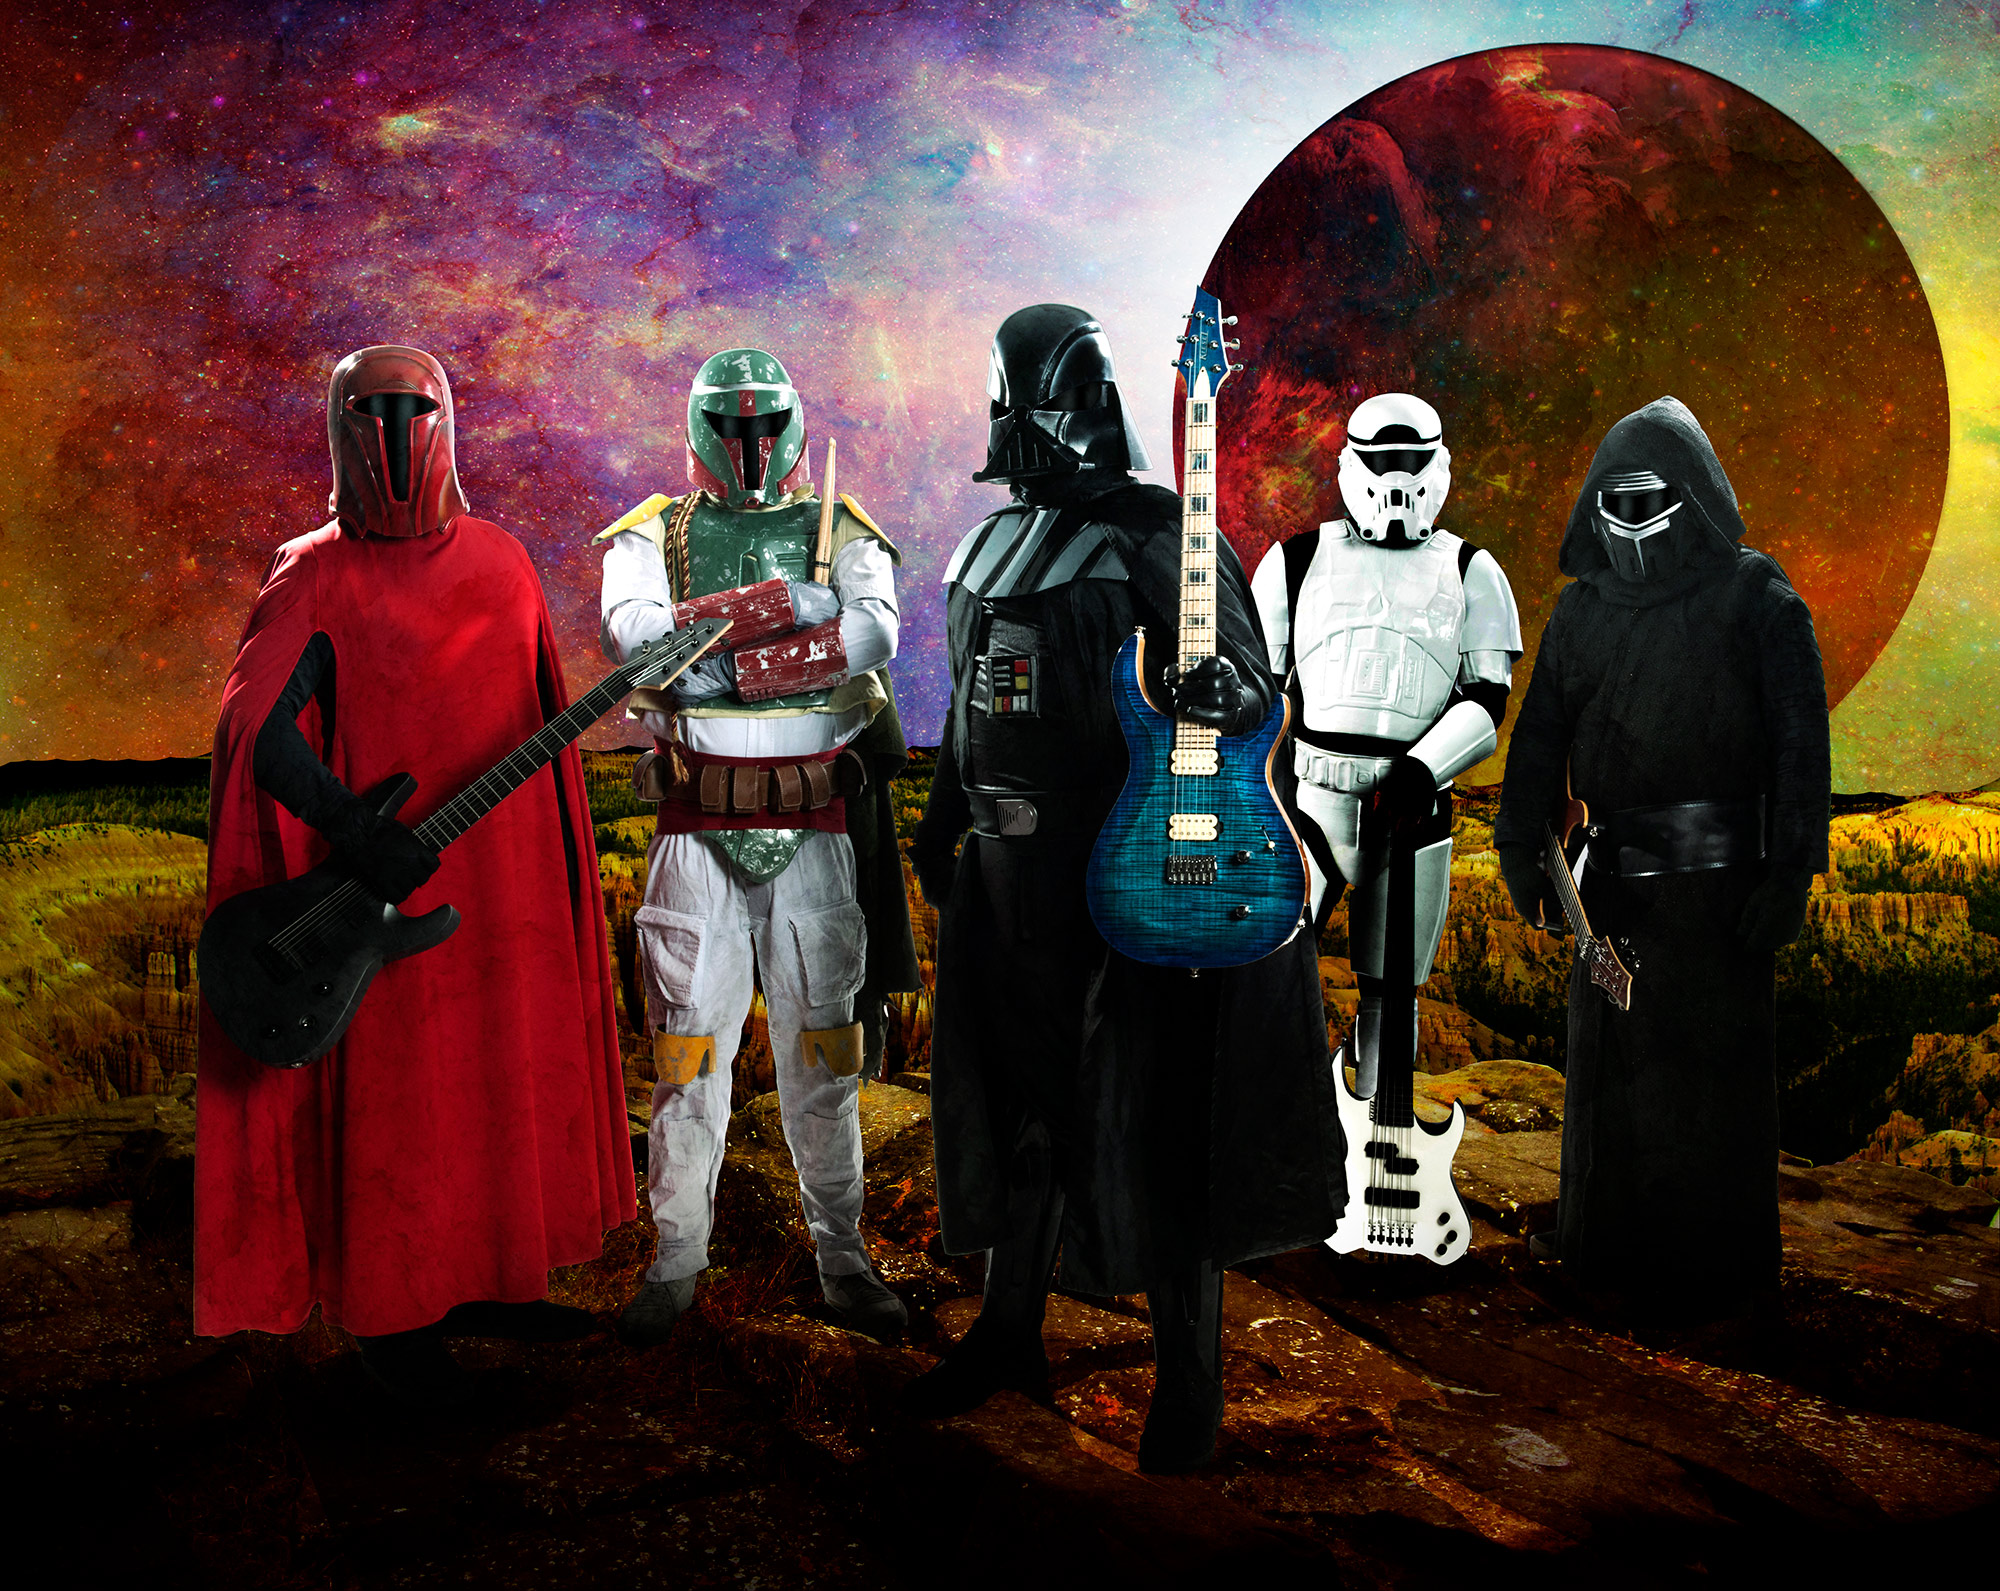 Star Wars-themed Metal band Galactic Empire coming to Australia in November